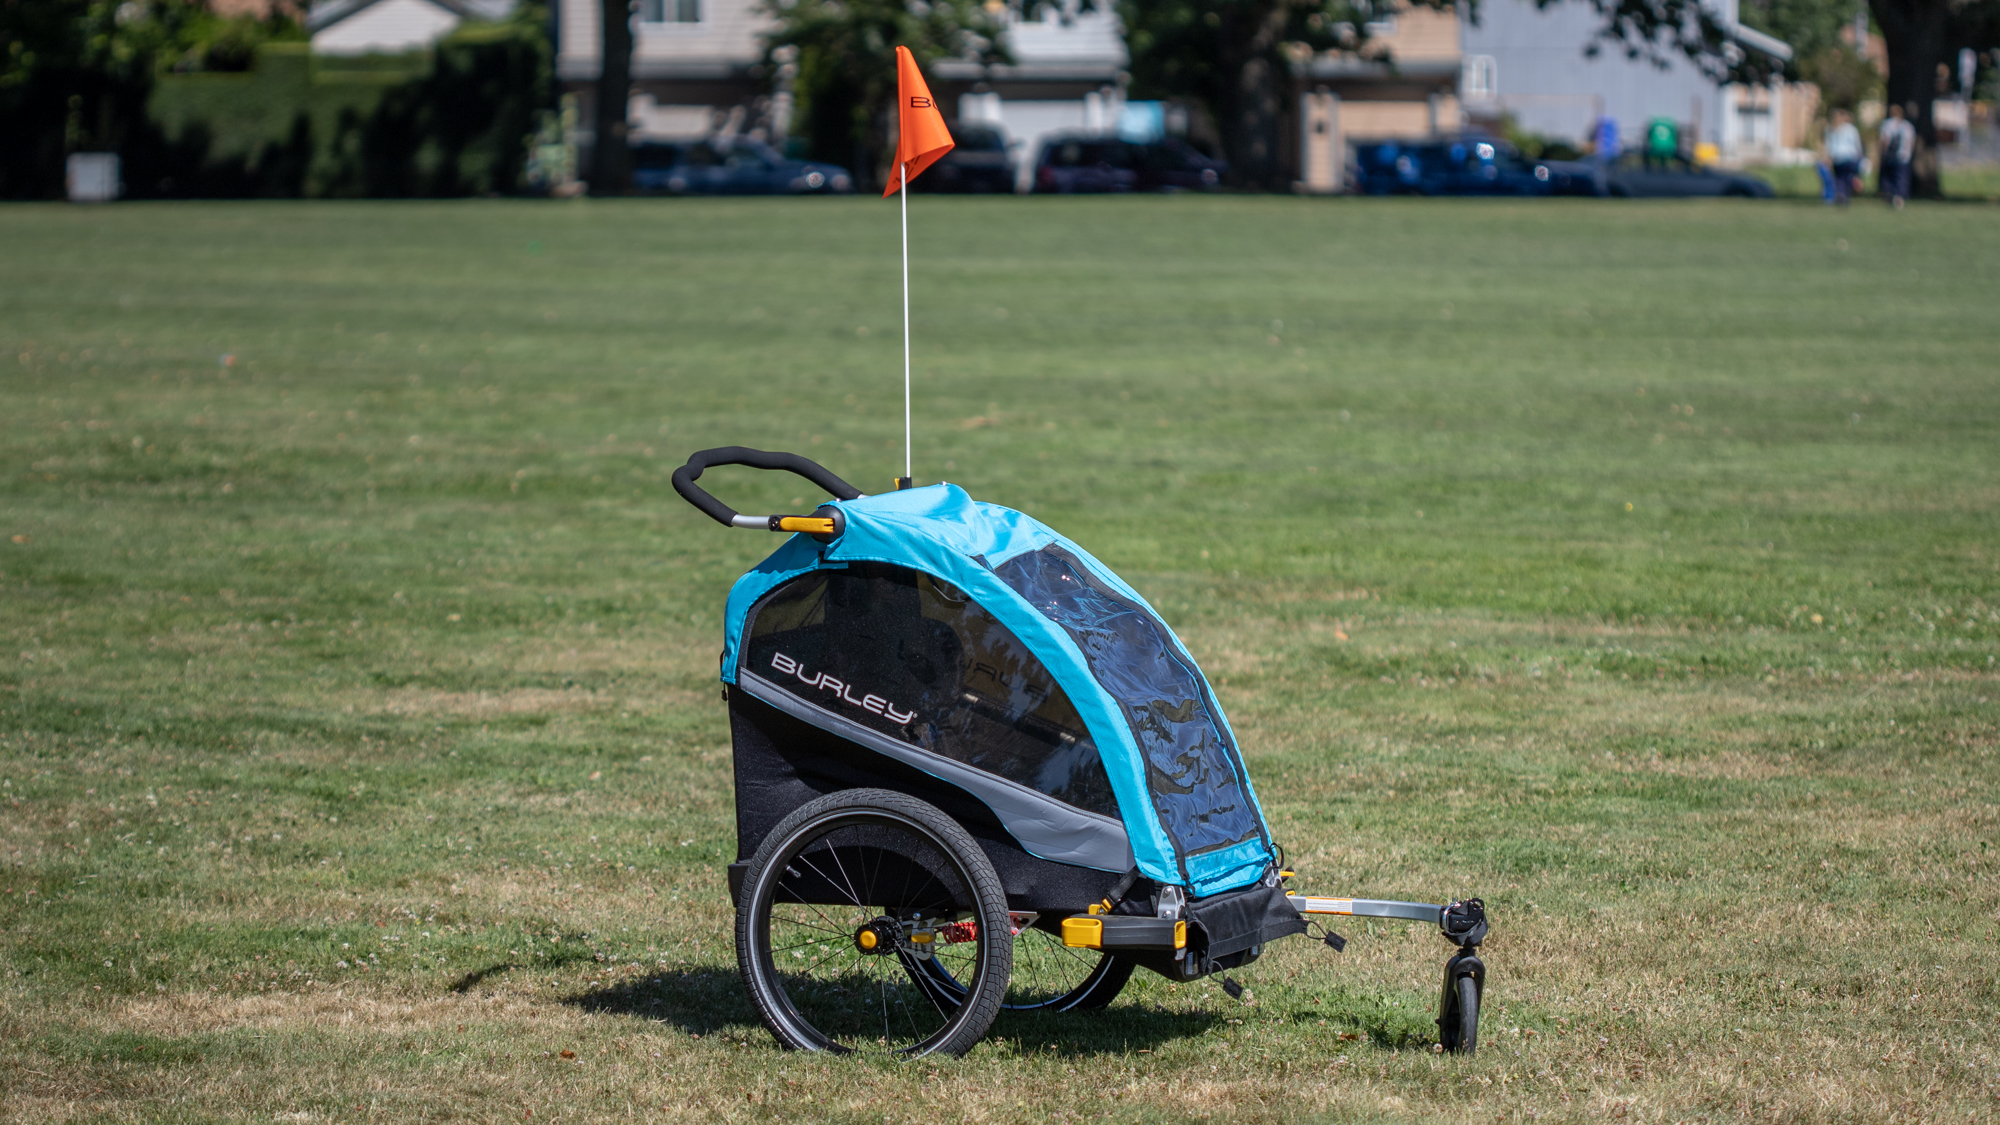 Burley D'Lite X kids' bike trailer review: It does one thing